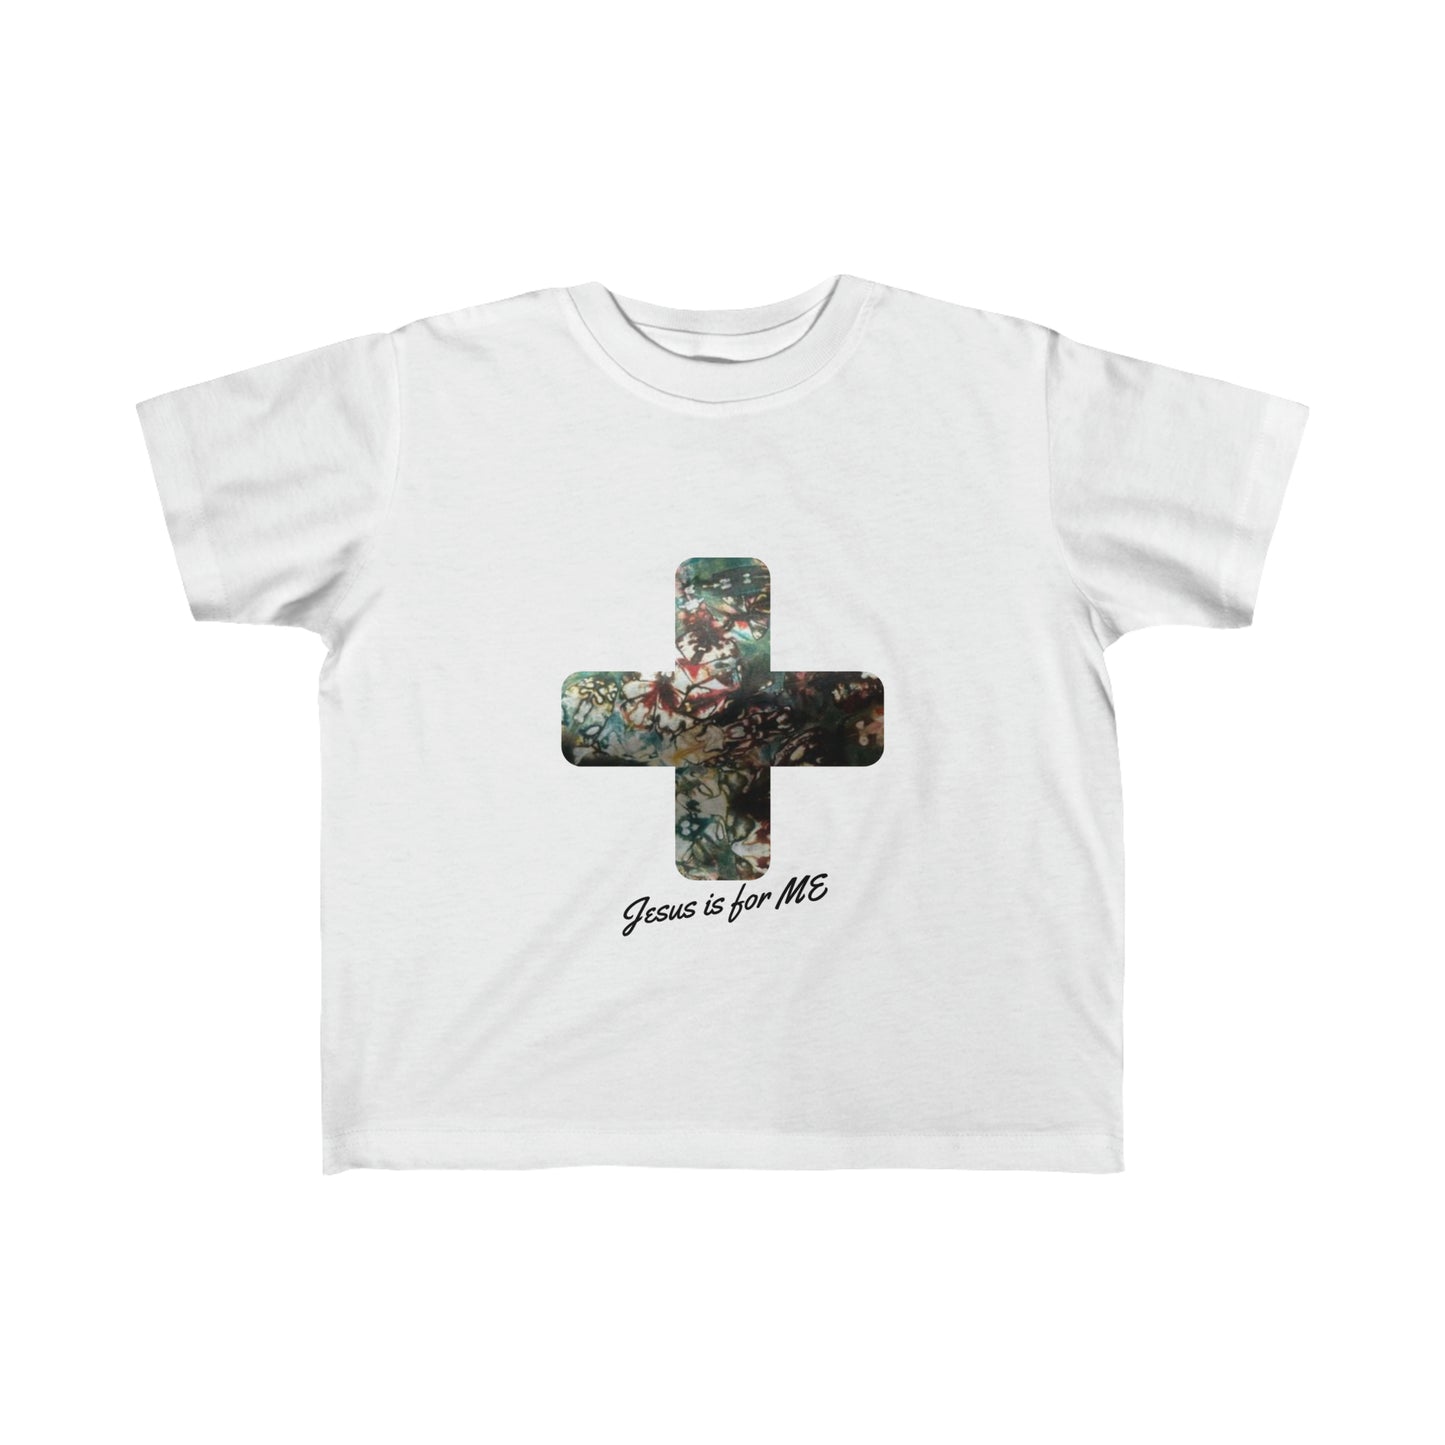 Jesus is for me Toddler's Fine Jersey Tee